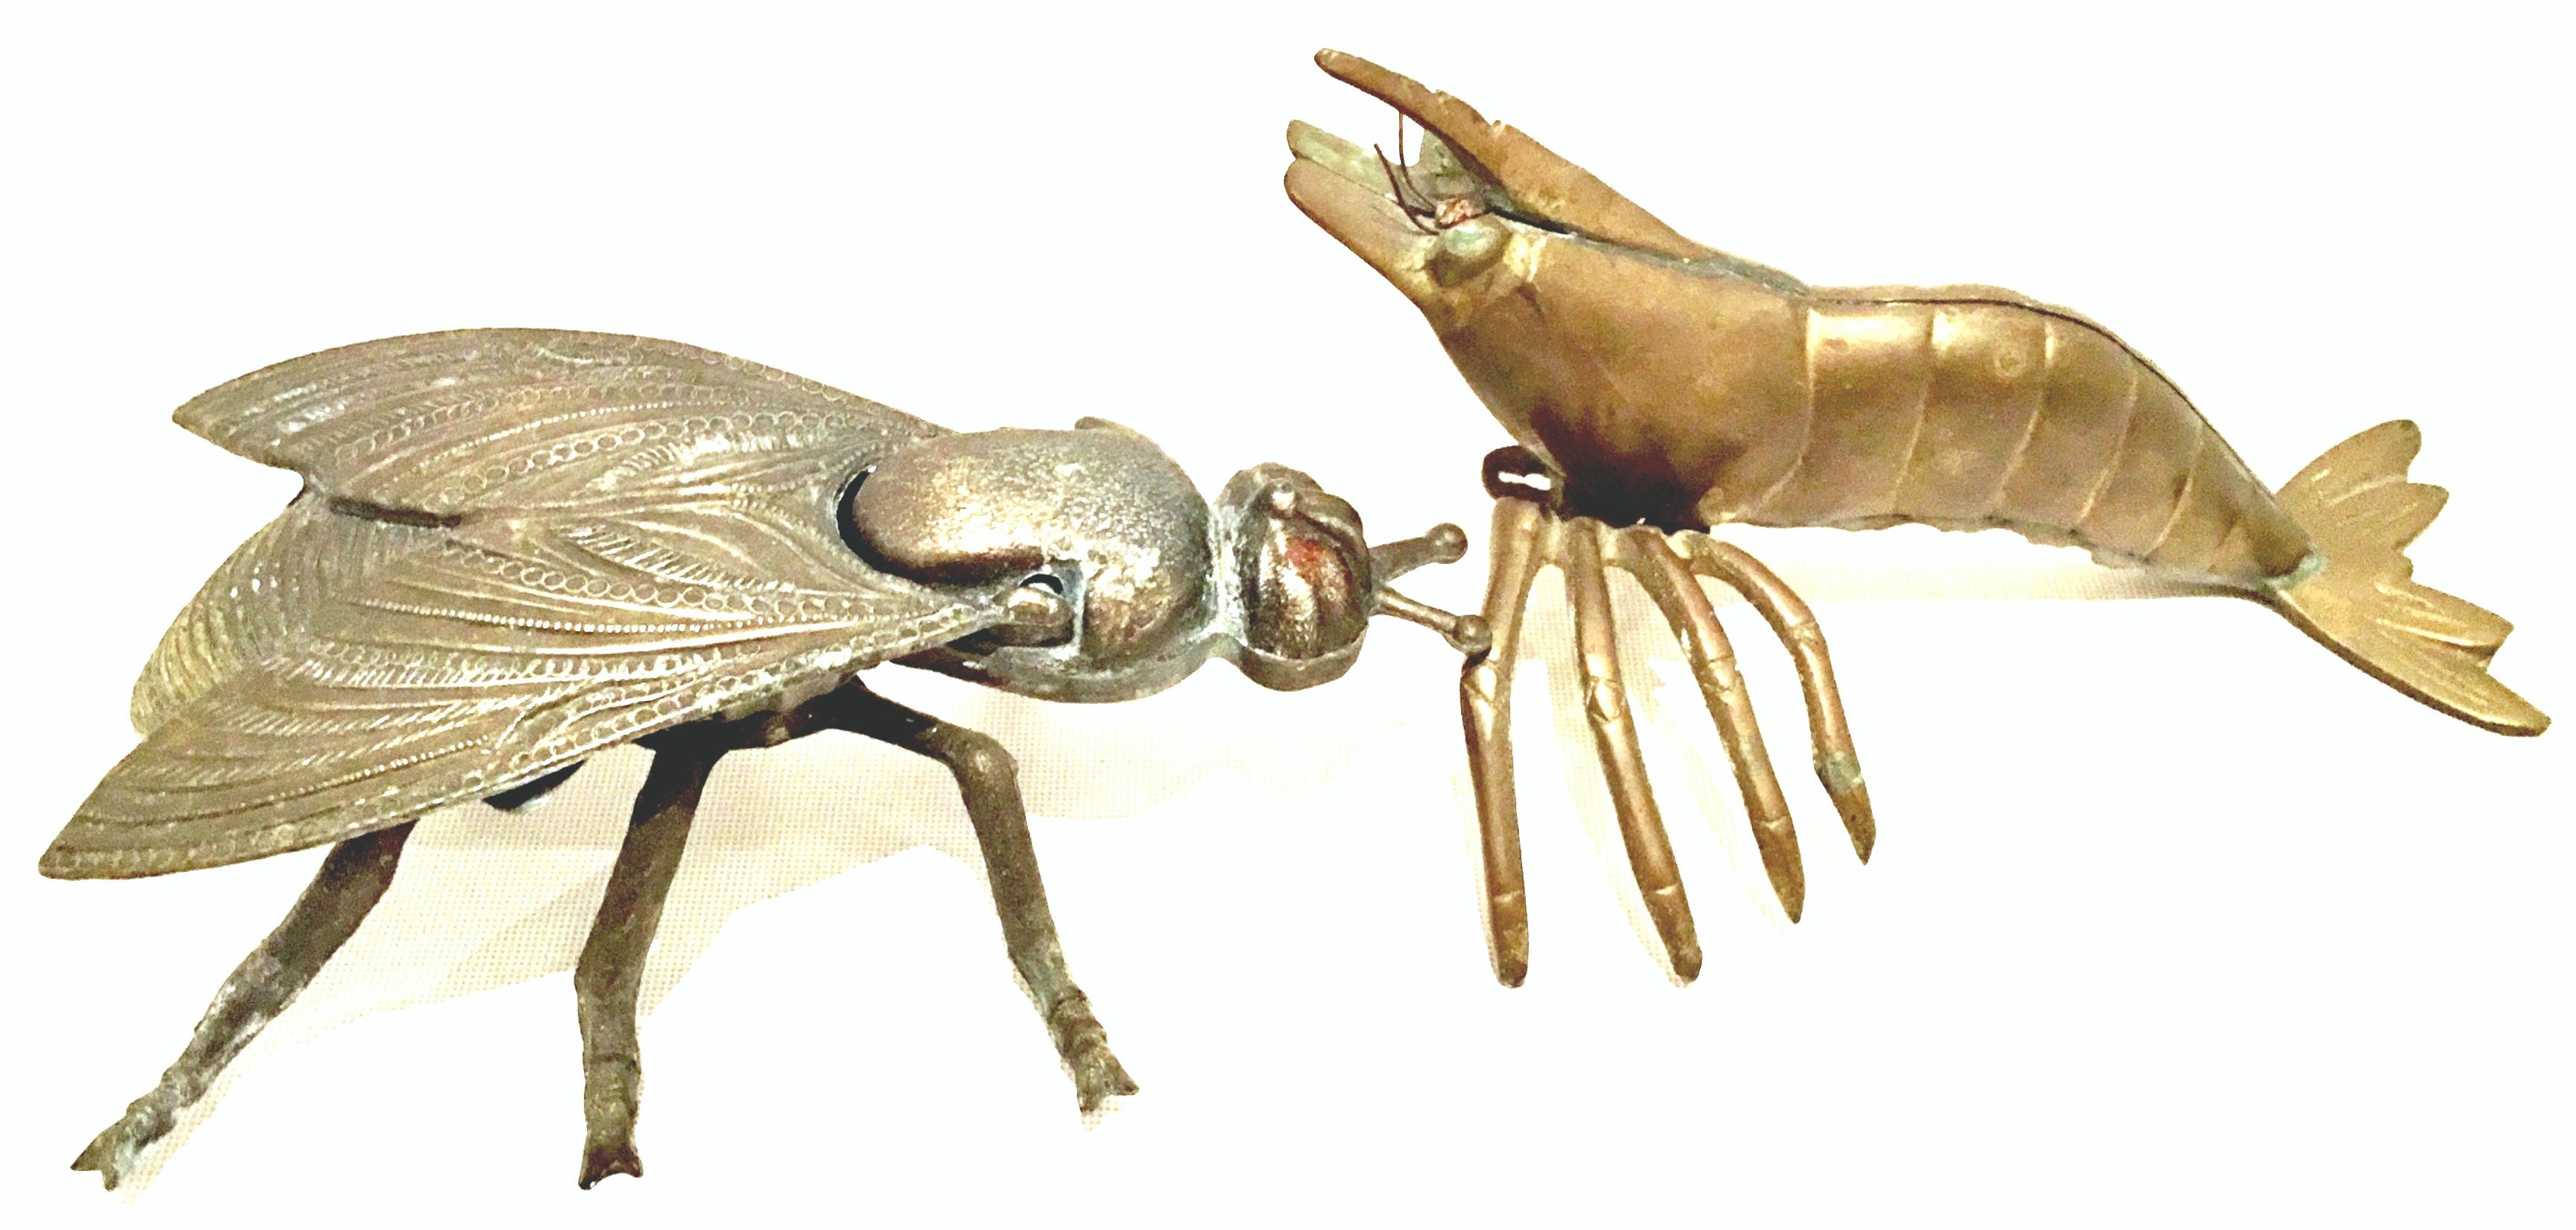 Mid-20th century Art Nouveau pair of iron and brass figural fly and shrimp sculpture & box. The Fly box made of cast iron features a hinged lid. The weighted brass shrimp features attached legs and wire articulating eye detail.
The hinged fly box